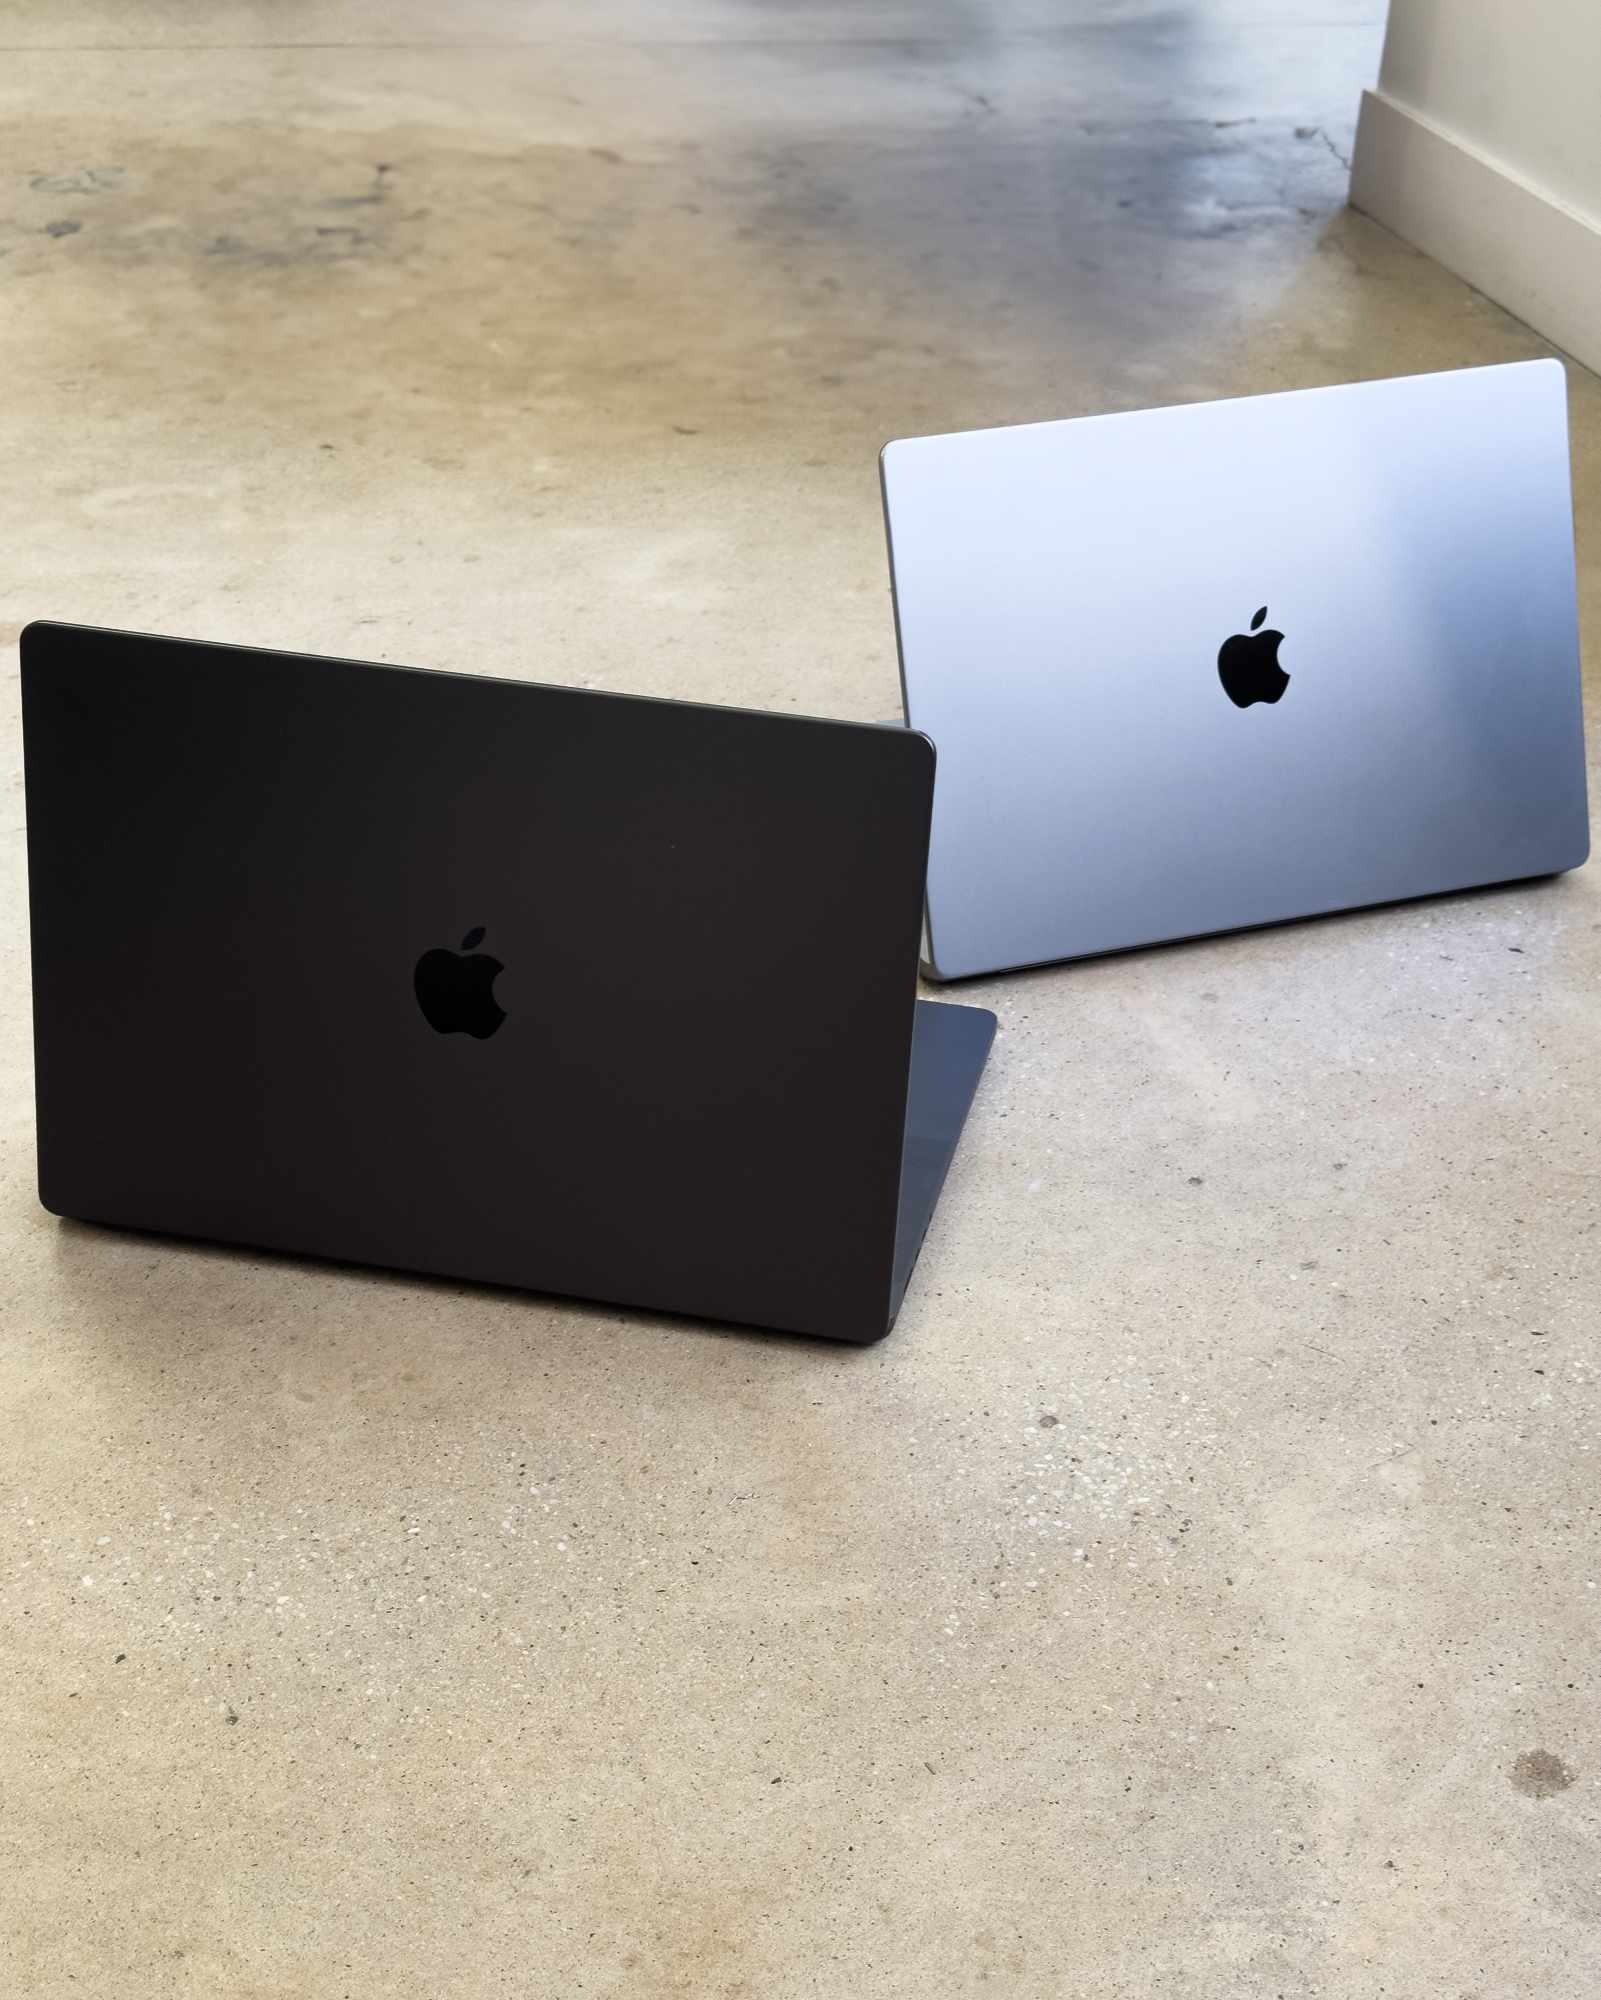 Photographs of Apple's grey and black 2023 MacBook Pro computers with the M3 chip